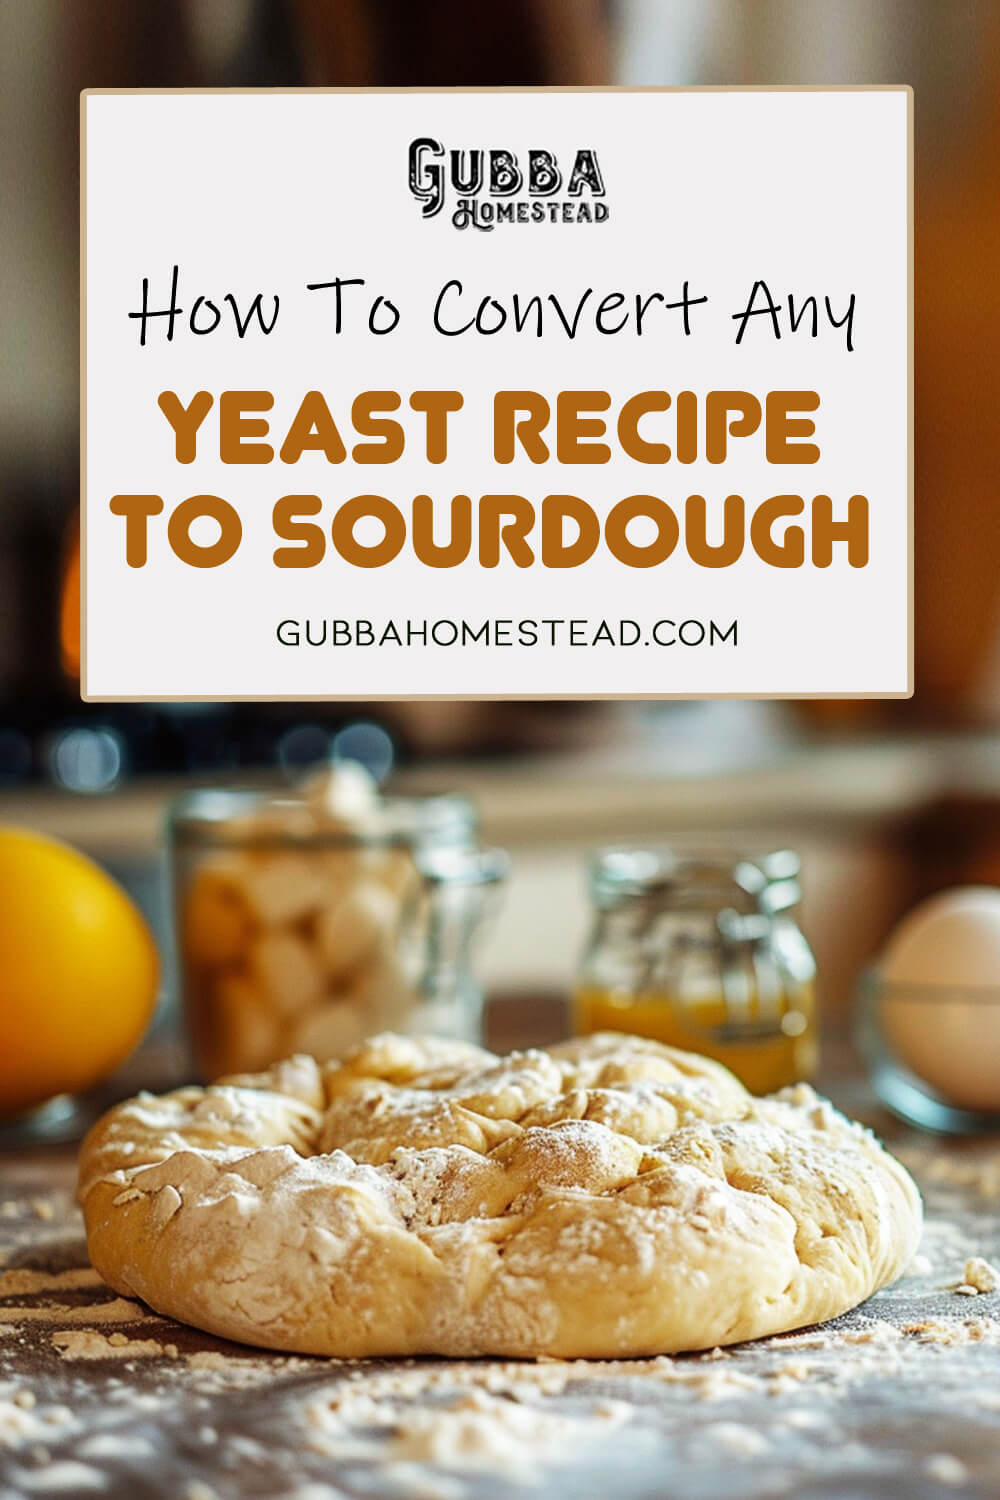 How To Convert Any Yeast Recipe To Sourdough